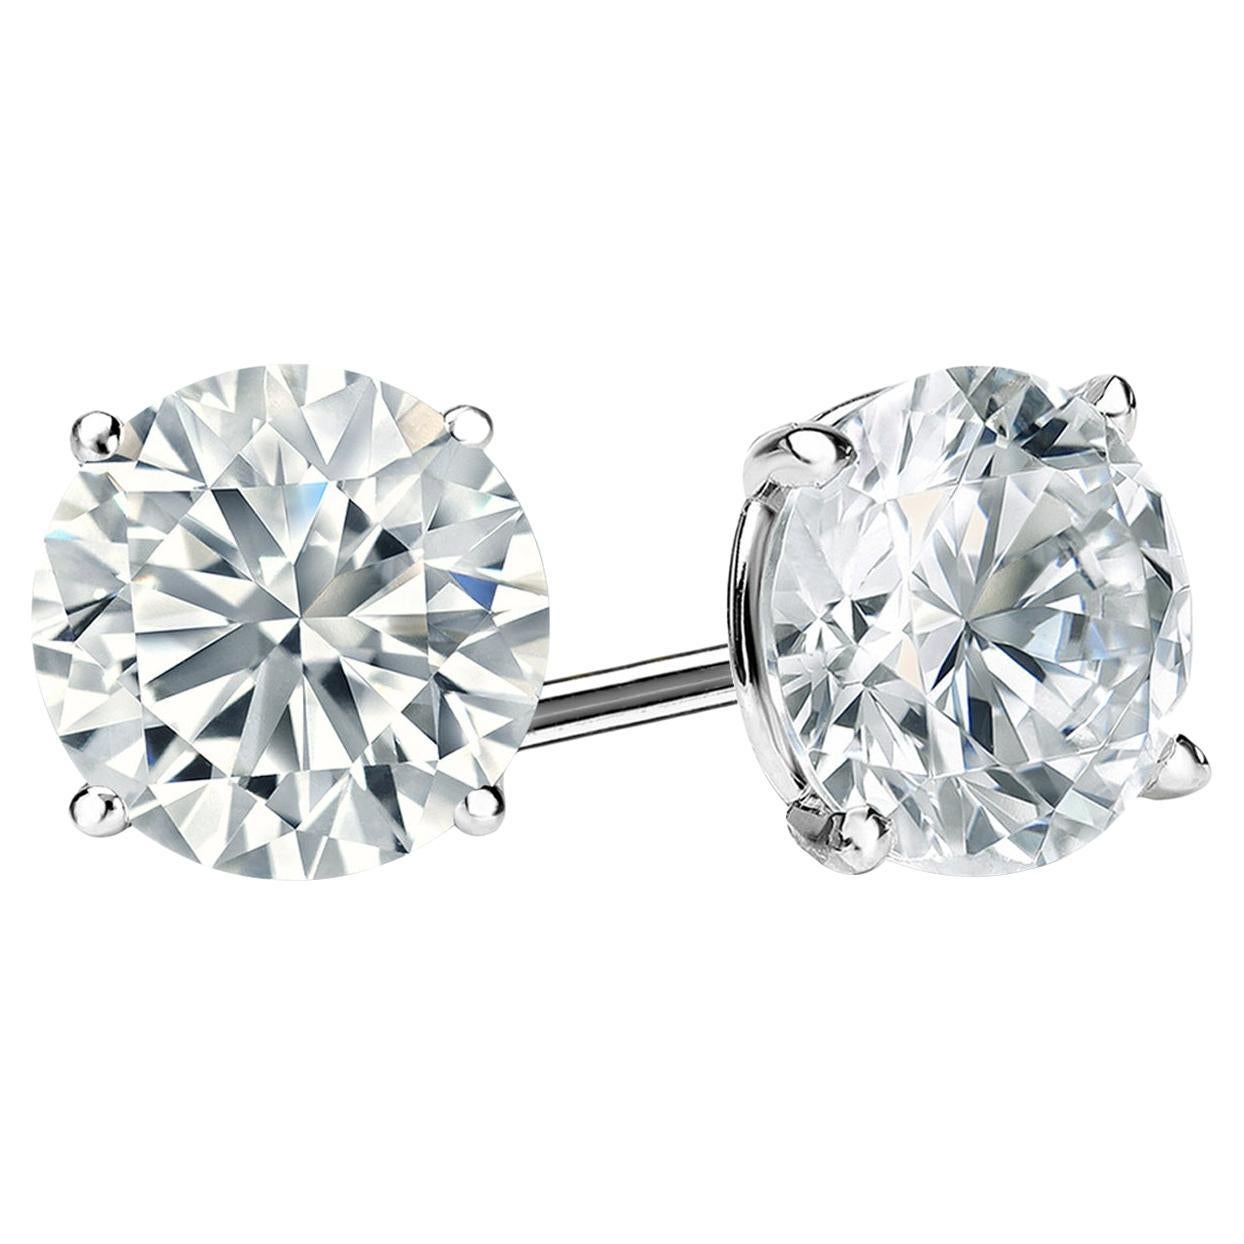 2.11ctw Natural Round Diamond Stud Earrings Pair 4-Prong Martini Setting For Sale